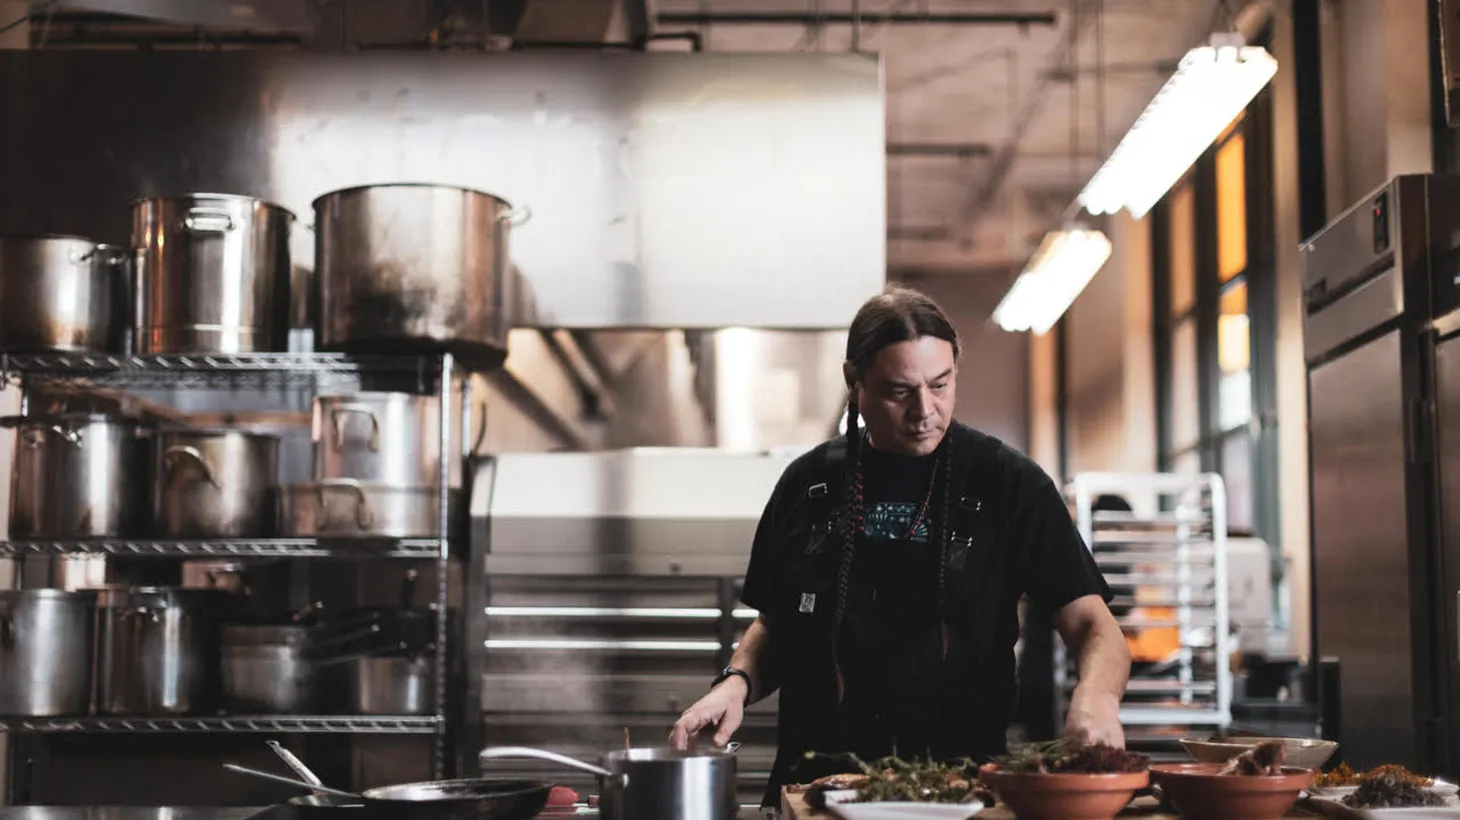 Founded by Sean Sherman, the North American Traditional Indigenous Food Systems (NATIFS) is dedicated to re-establishing Native foodways, starting with his community in Minneapolis.